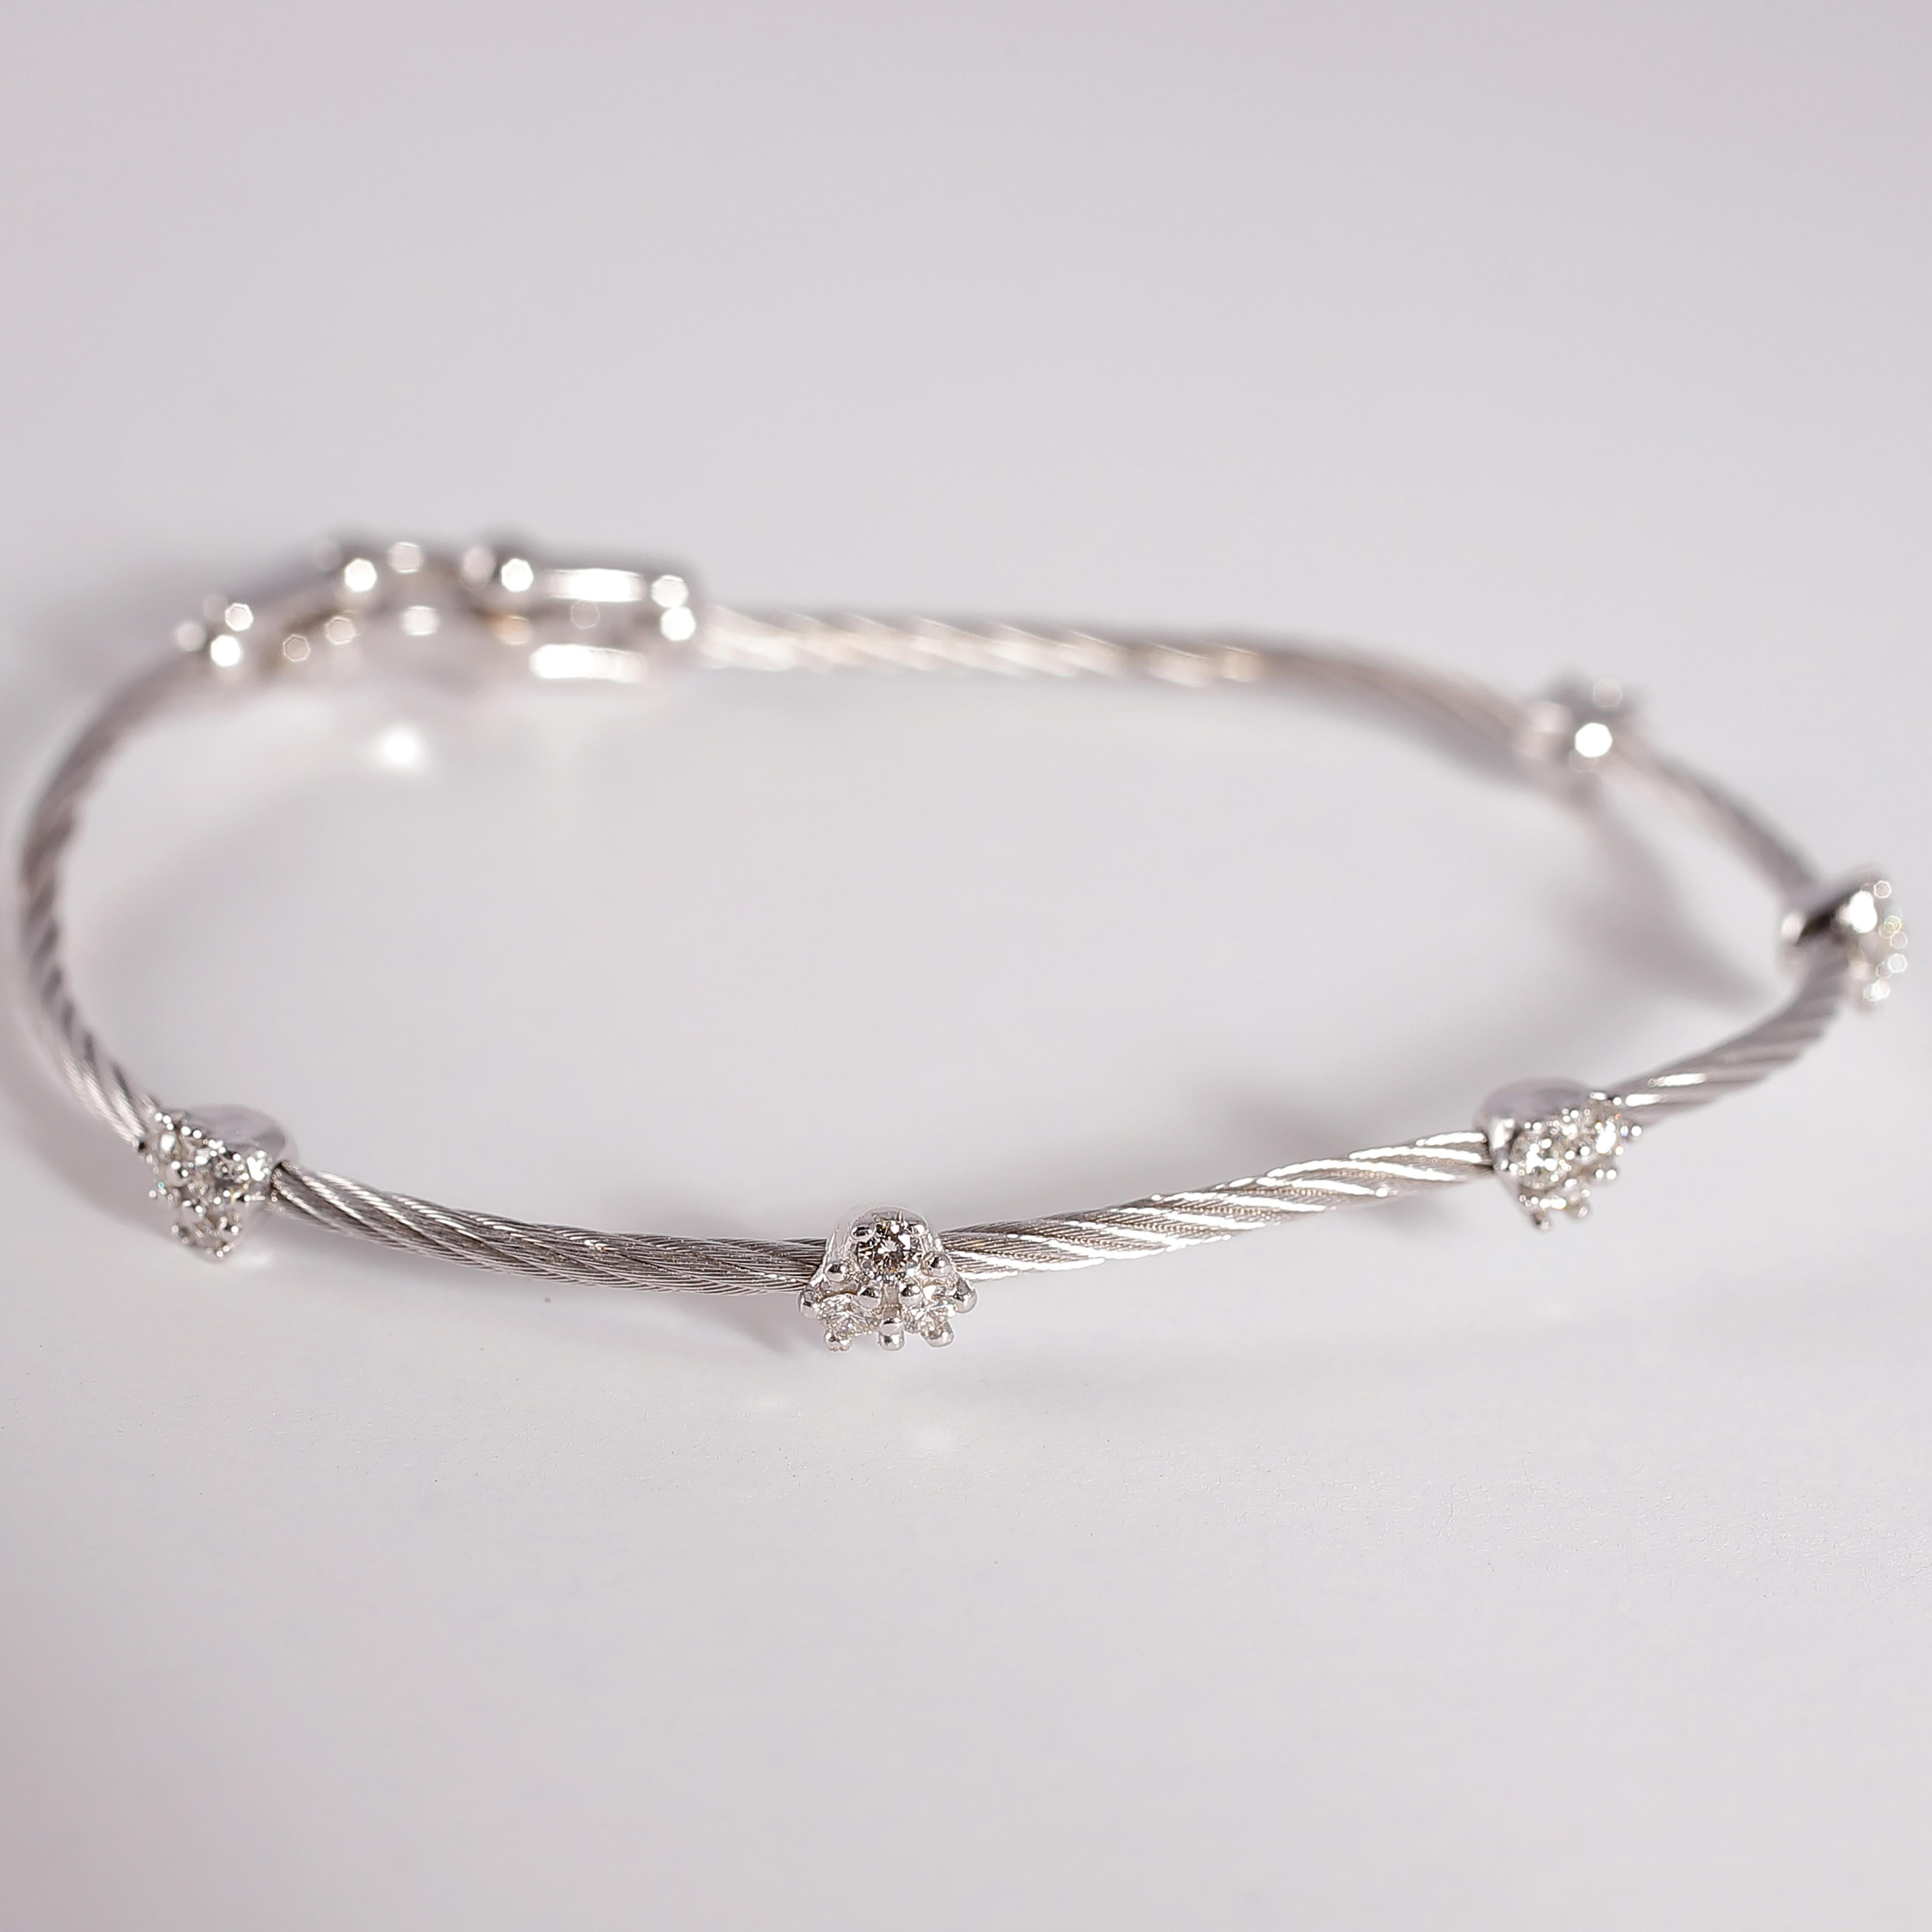 Women's or Men's Paul Morelli Diamond Bracelet from the Cluster Collection For Sale